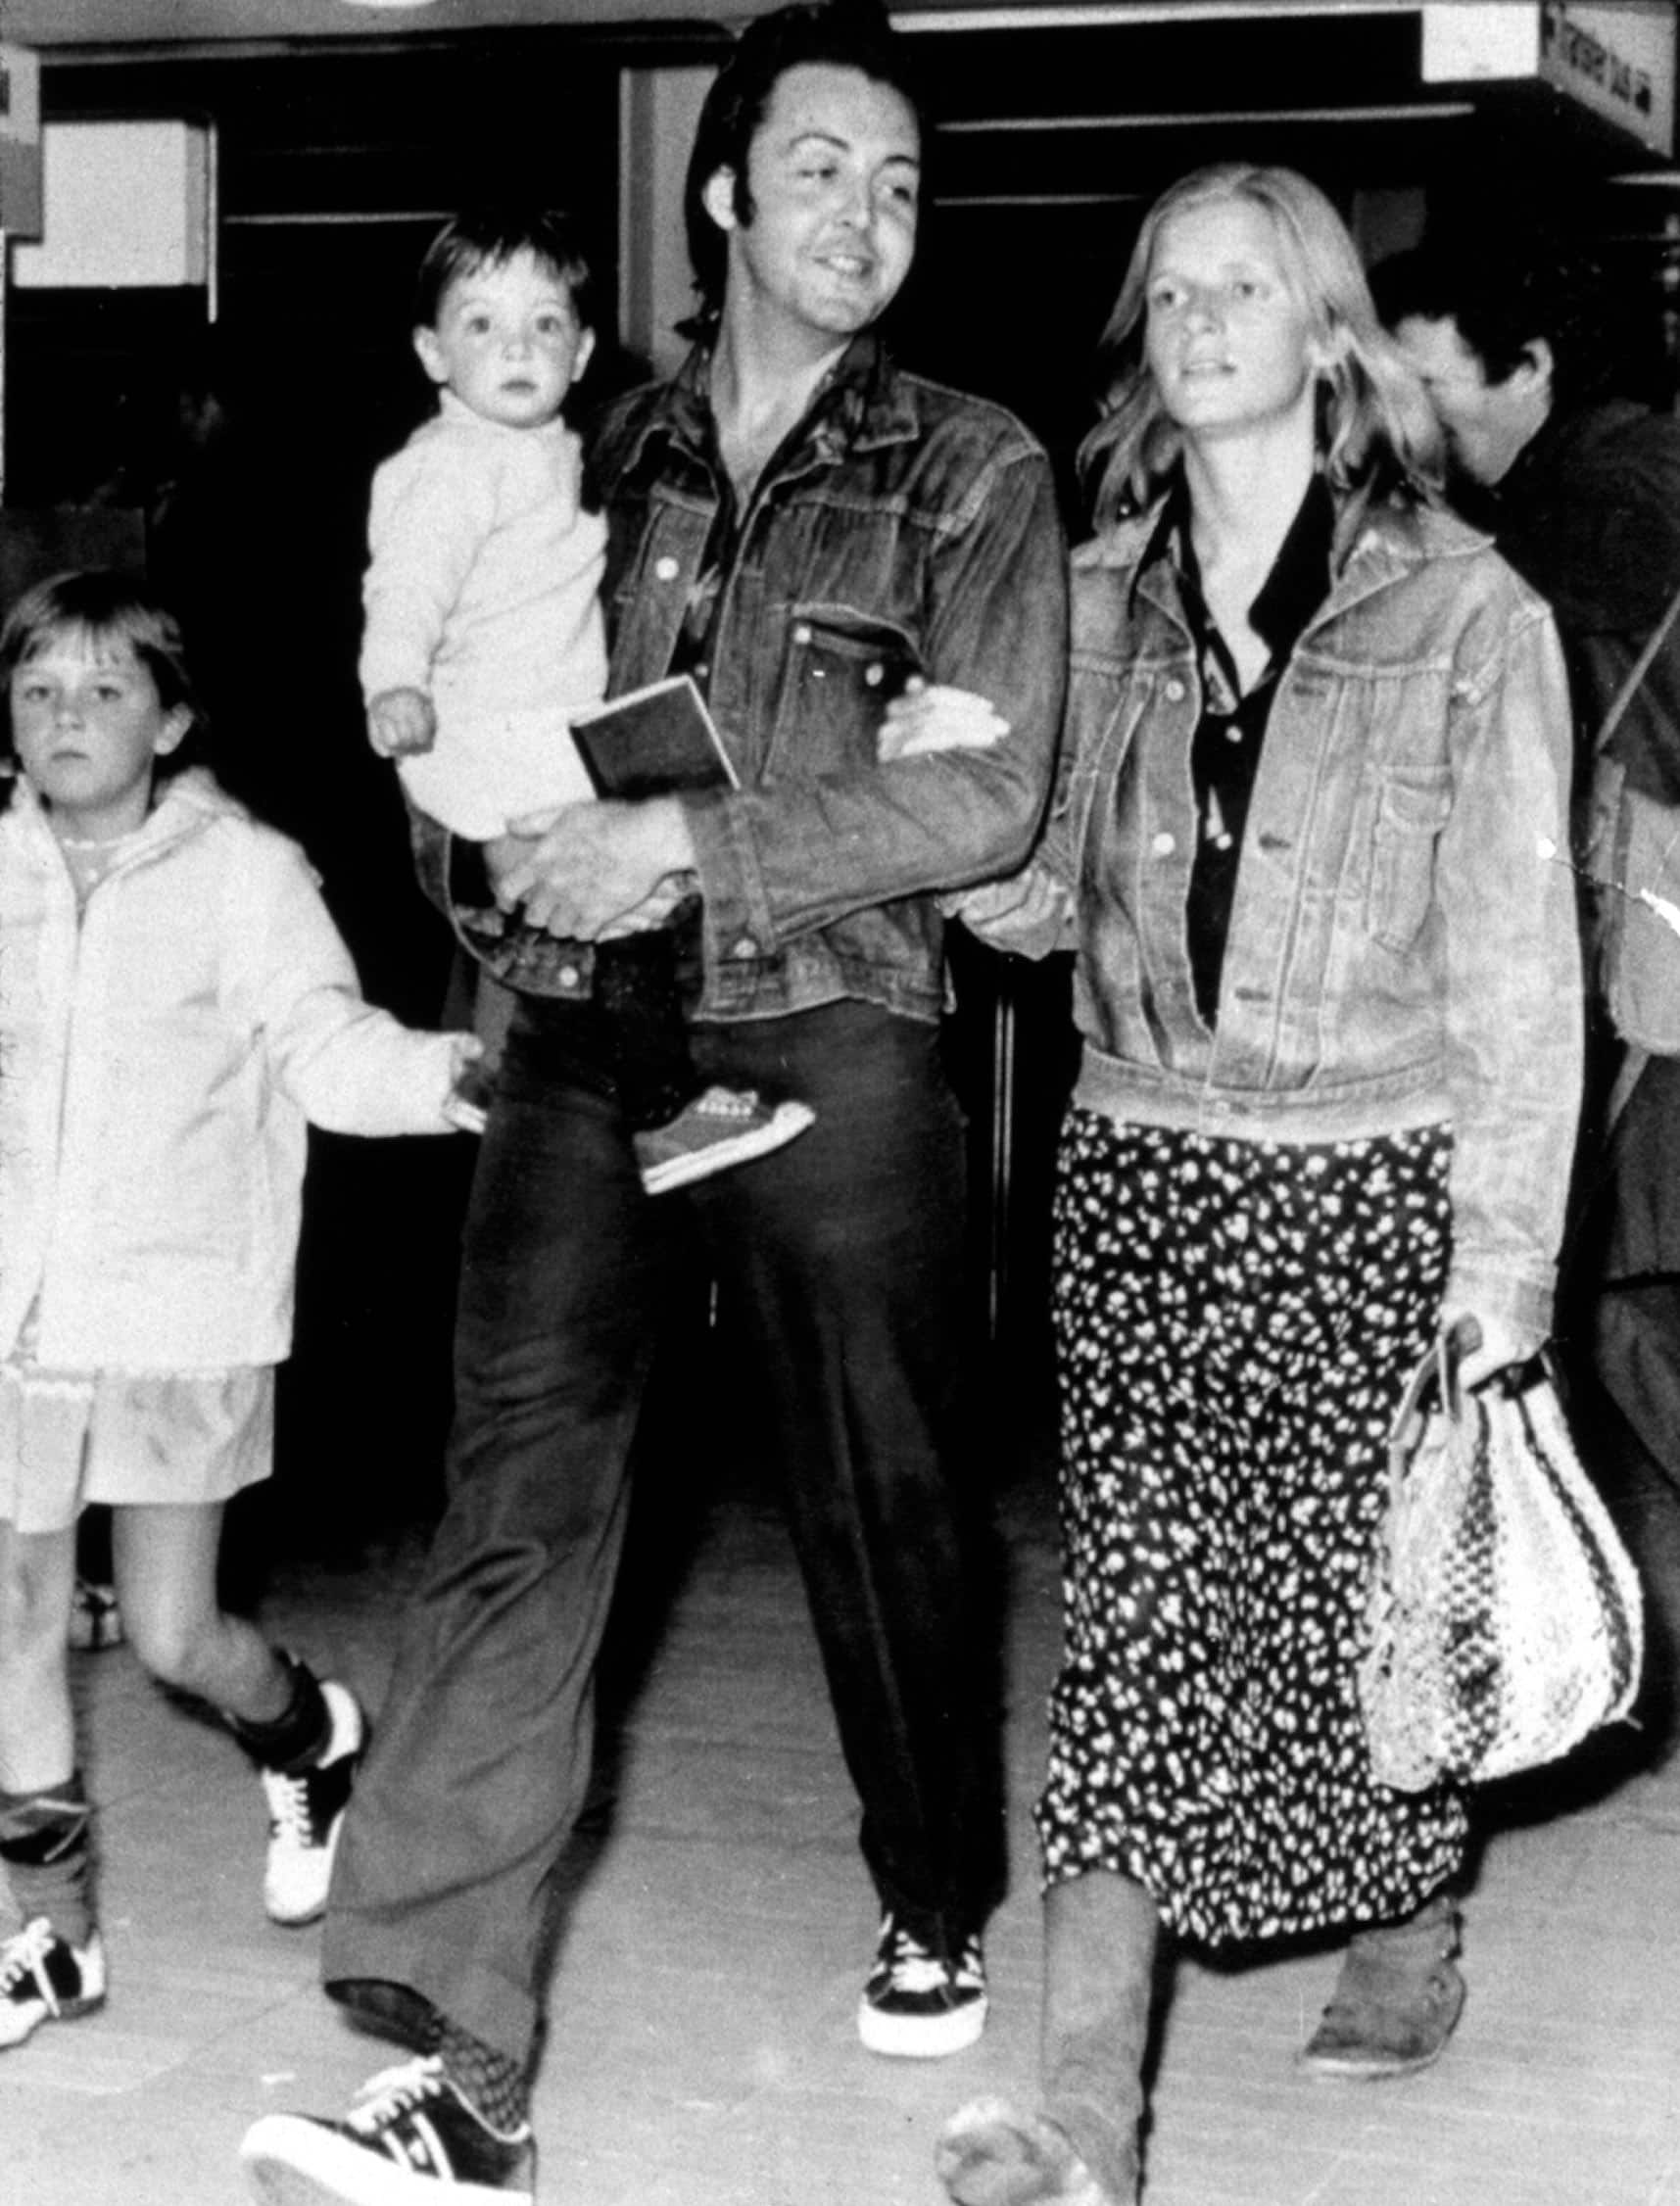 Paul and Linda McCartney with children Heather and Mary at airport, 1971